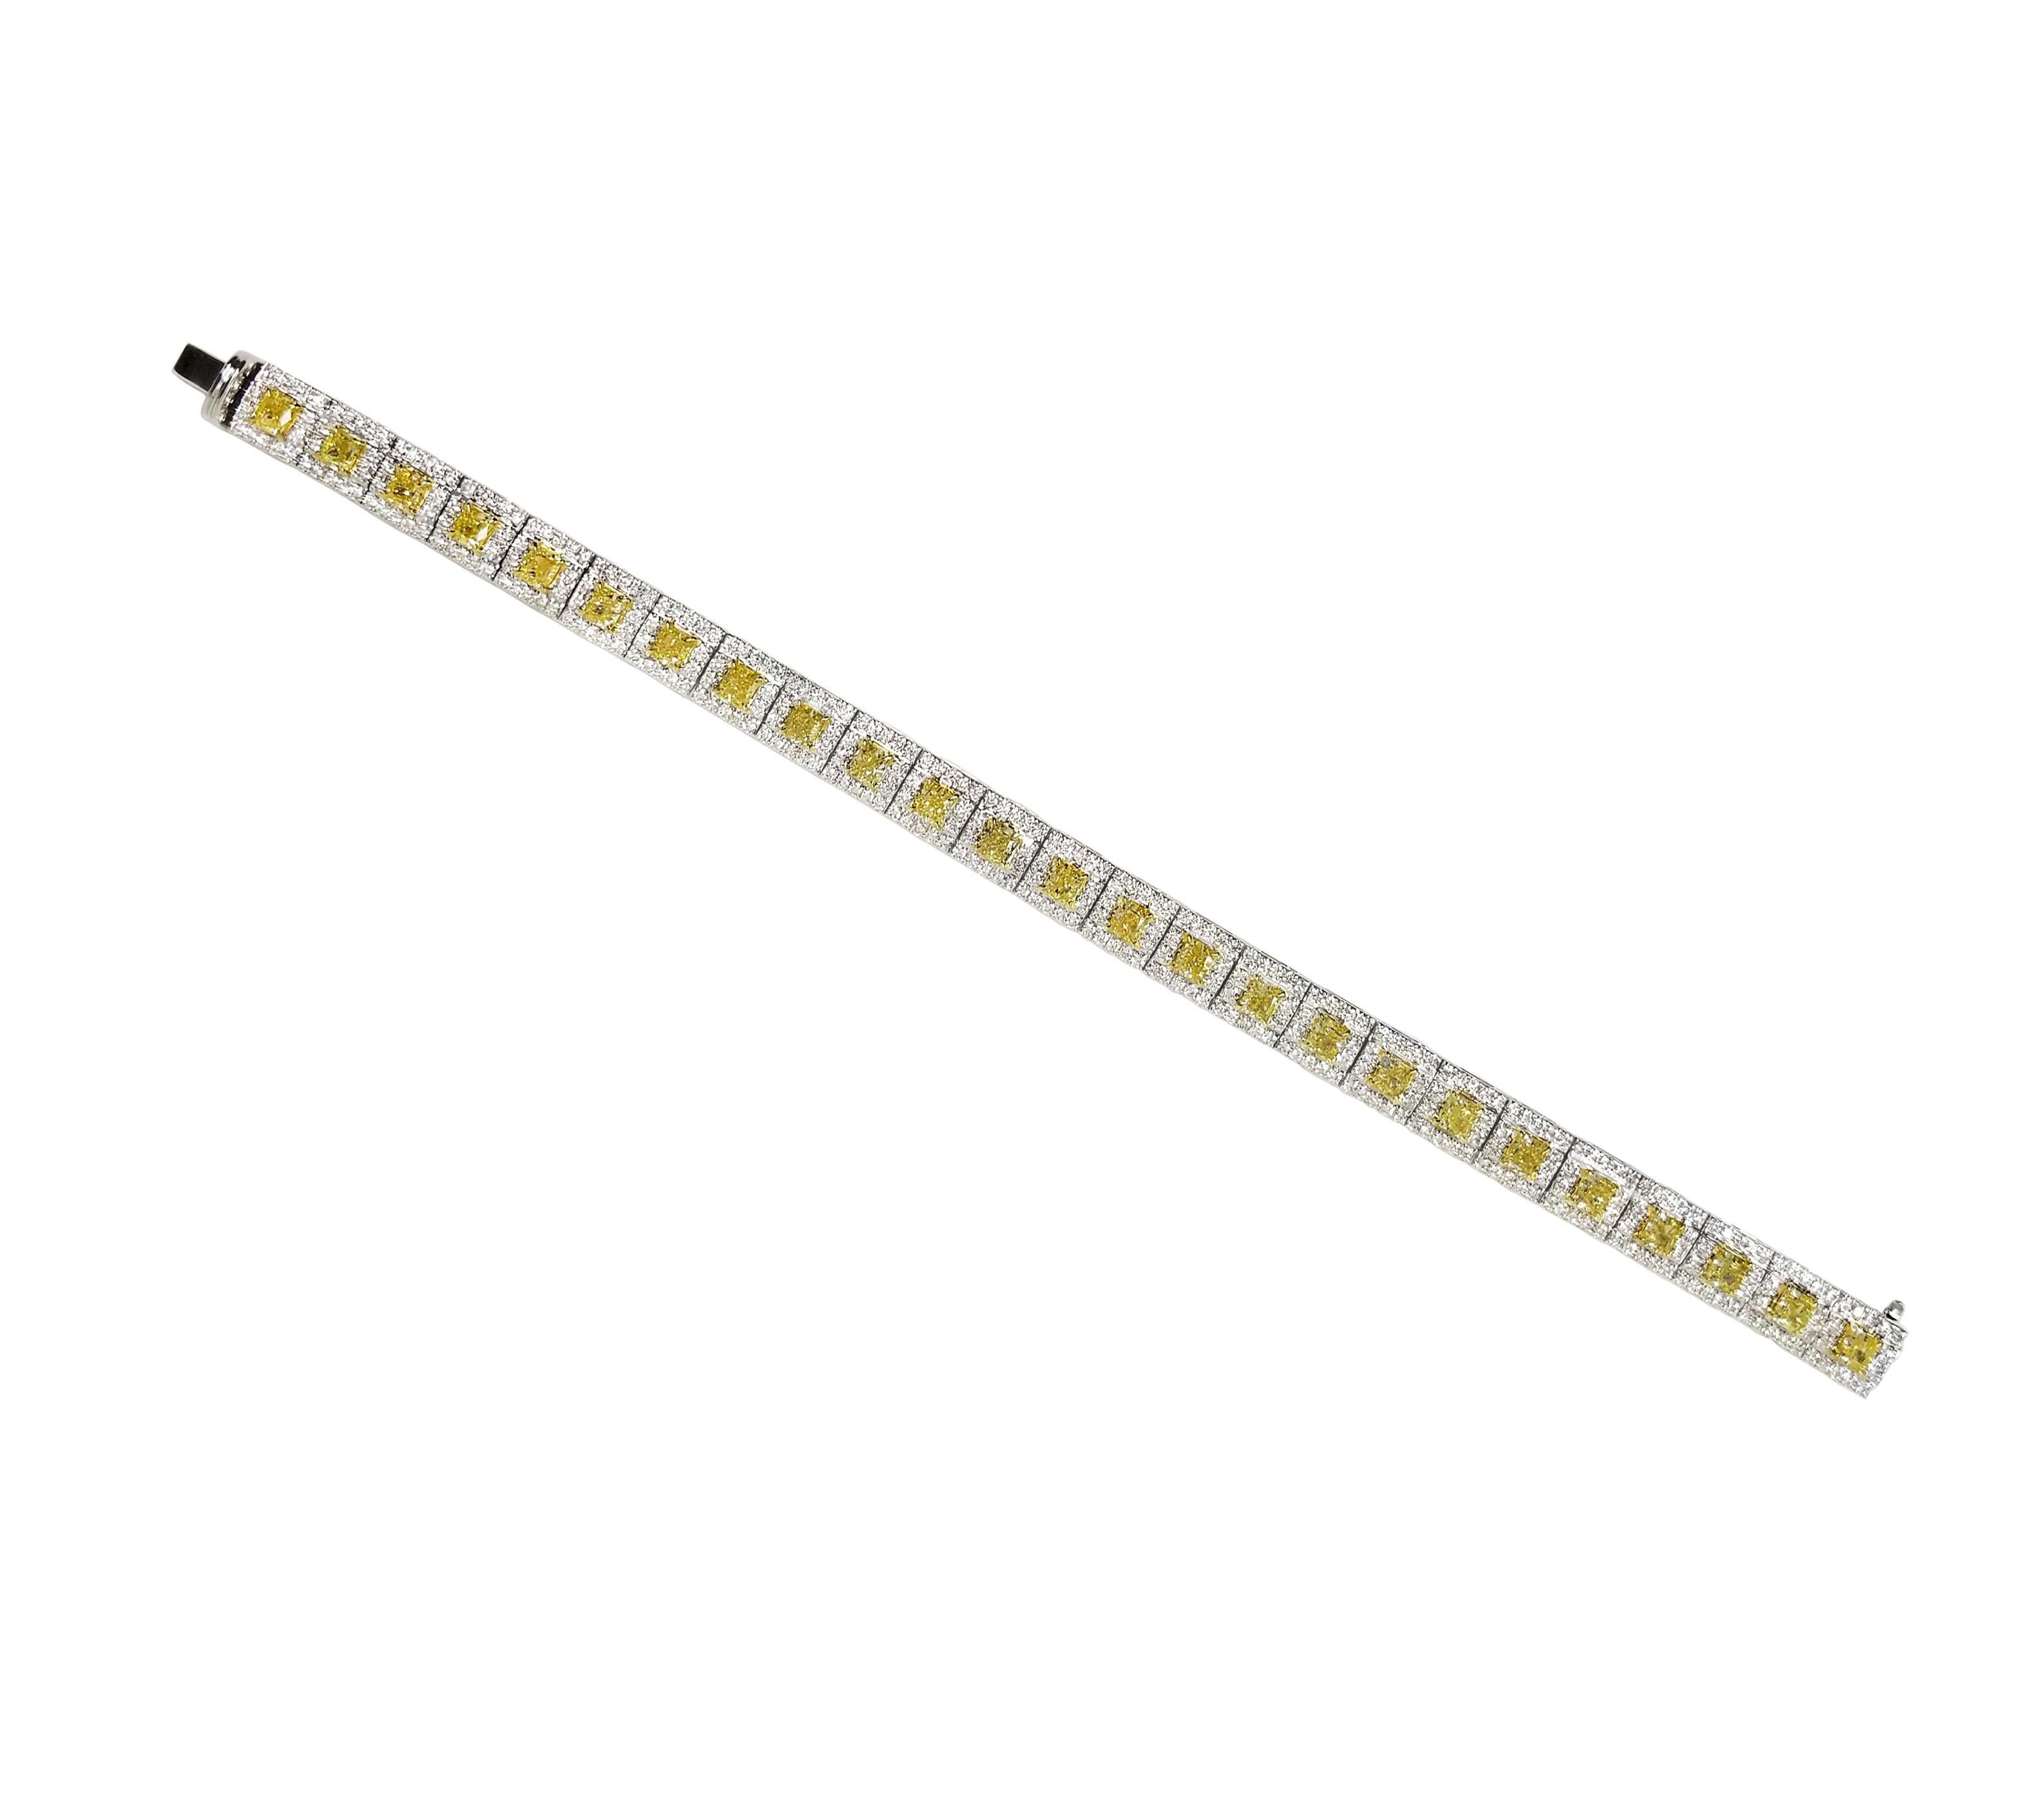 From SCARSELLI, globally recognized for investment grade natural fancy color diamonds is this perfectly handmade tailored line bracelet in 18k Gold and Platinum, containing 25 matched fancy intense yellow cushion cut diamonds of VS clarity totaling